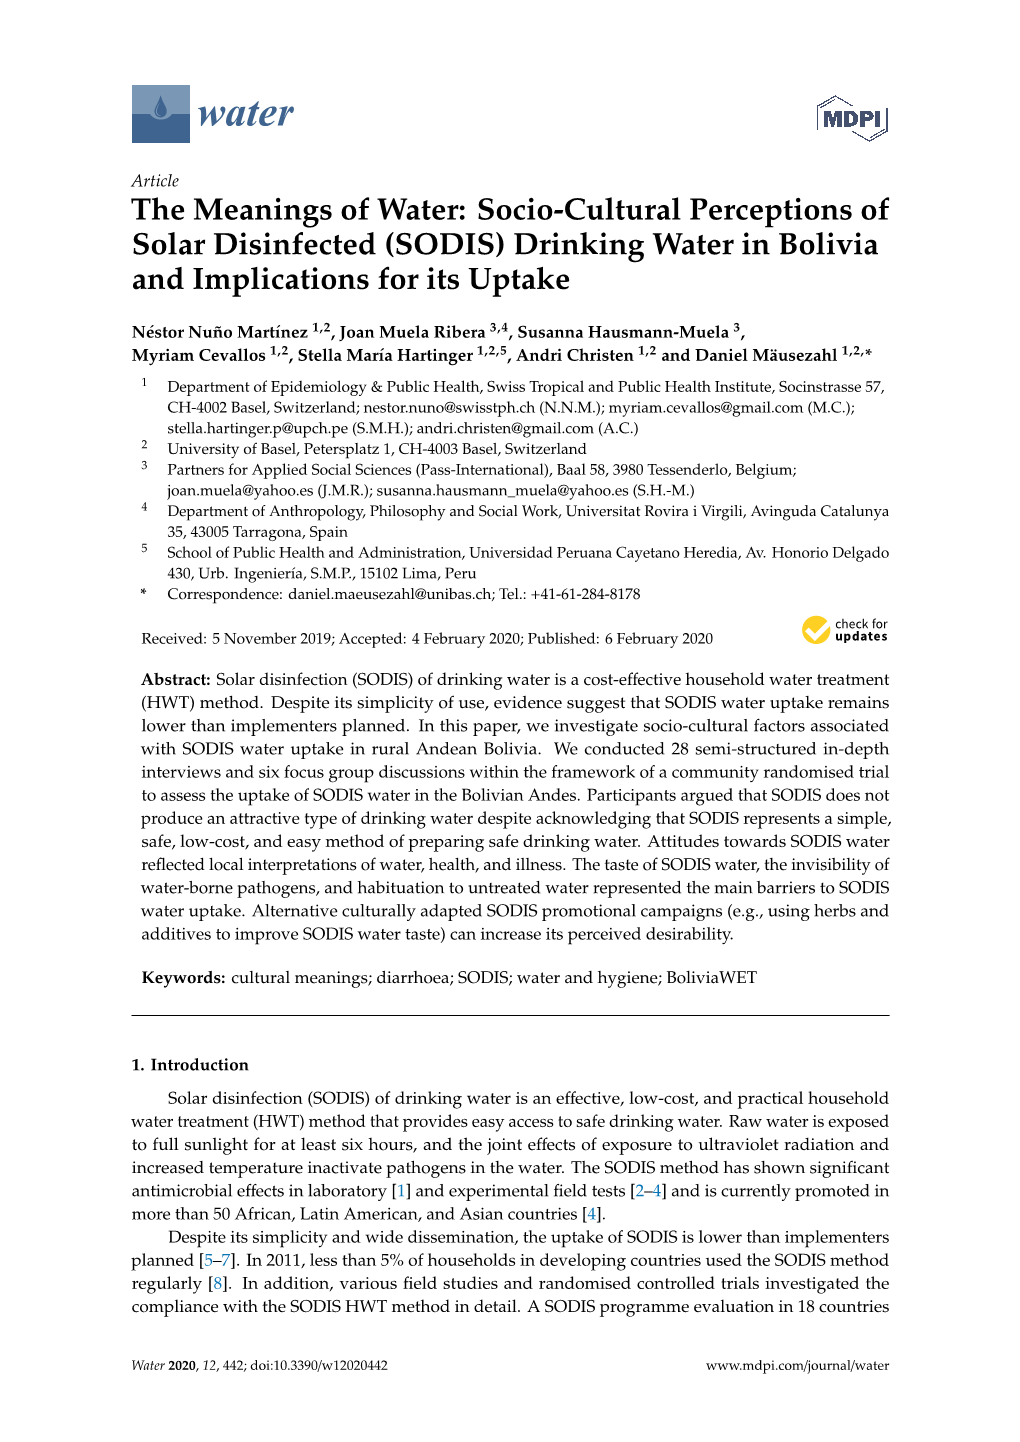 (SODIS) Drinking Water in Bolivia and Implications for Its Uptake